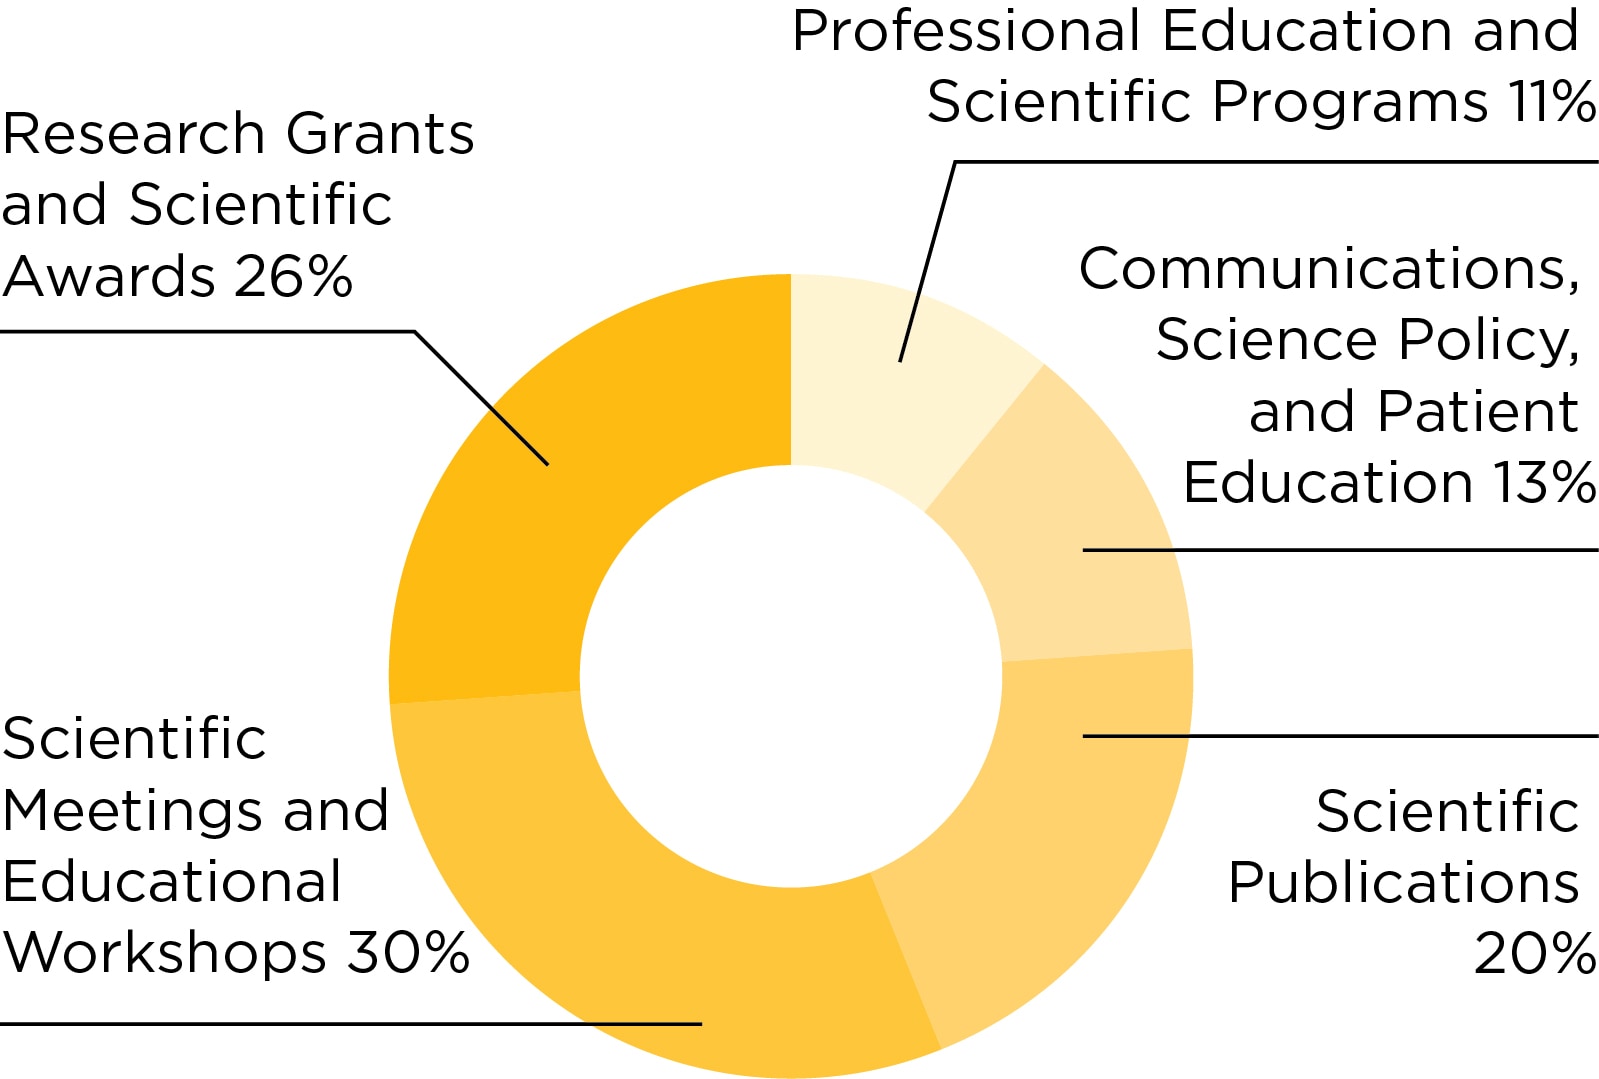 Chart: 2022 program expenses: Research grants and scientific awards, 26 percent; scientific meetings and educational workshops, 30 percent; scientific publications, 20 percent; professional education and scientific programs, 11 percent; communications, science policy, and patient education, 13 percent.